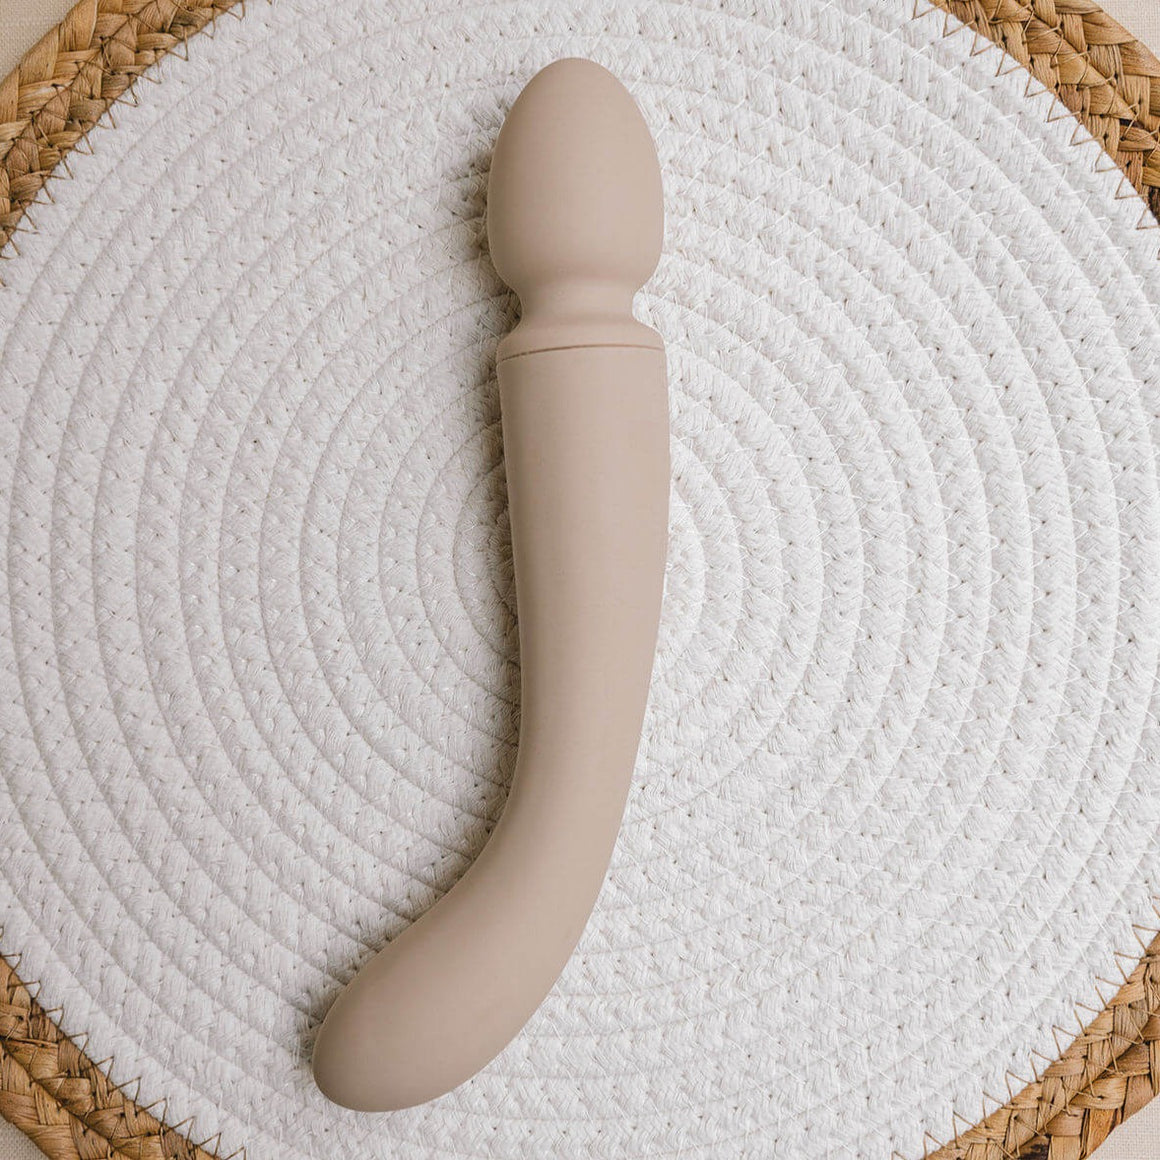 Cassia | Dual-ended and Curved Wand Vibrator